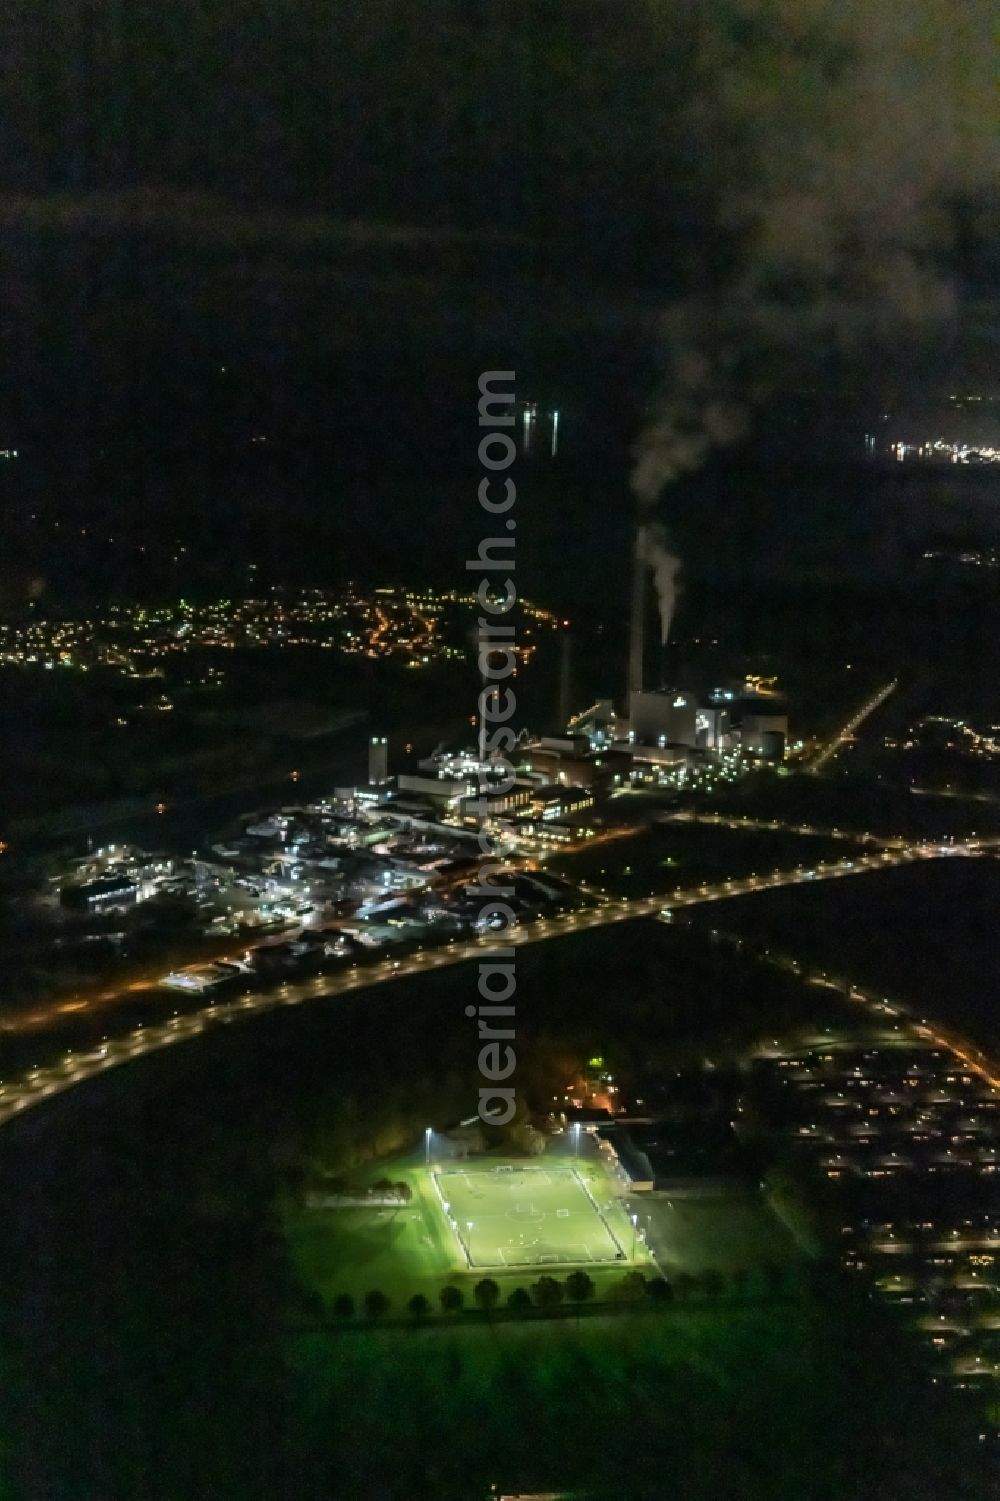 Odense at night from the bird perspective: Night lighting ensemble of sports grounds in the district Odense NOe in Odense in Syddanmark, Denmark